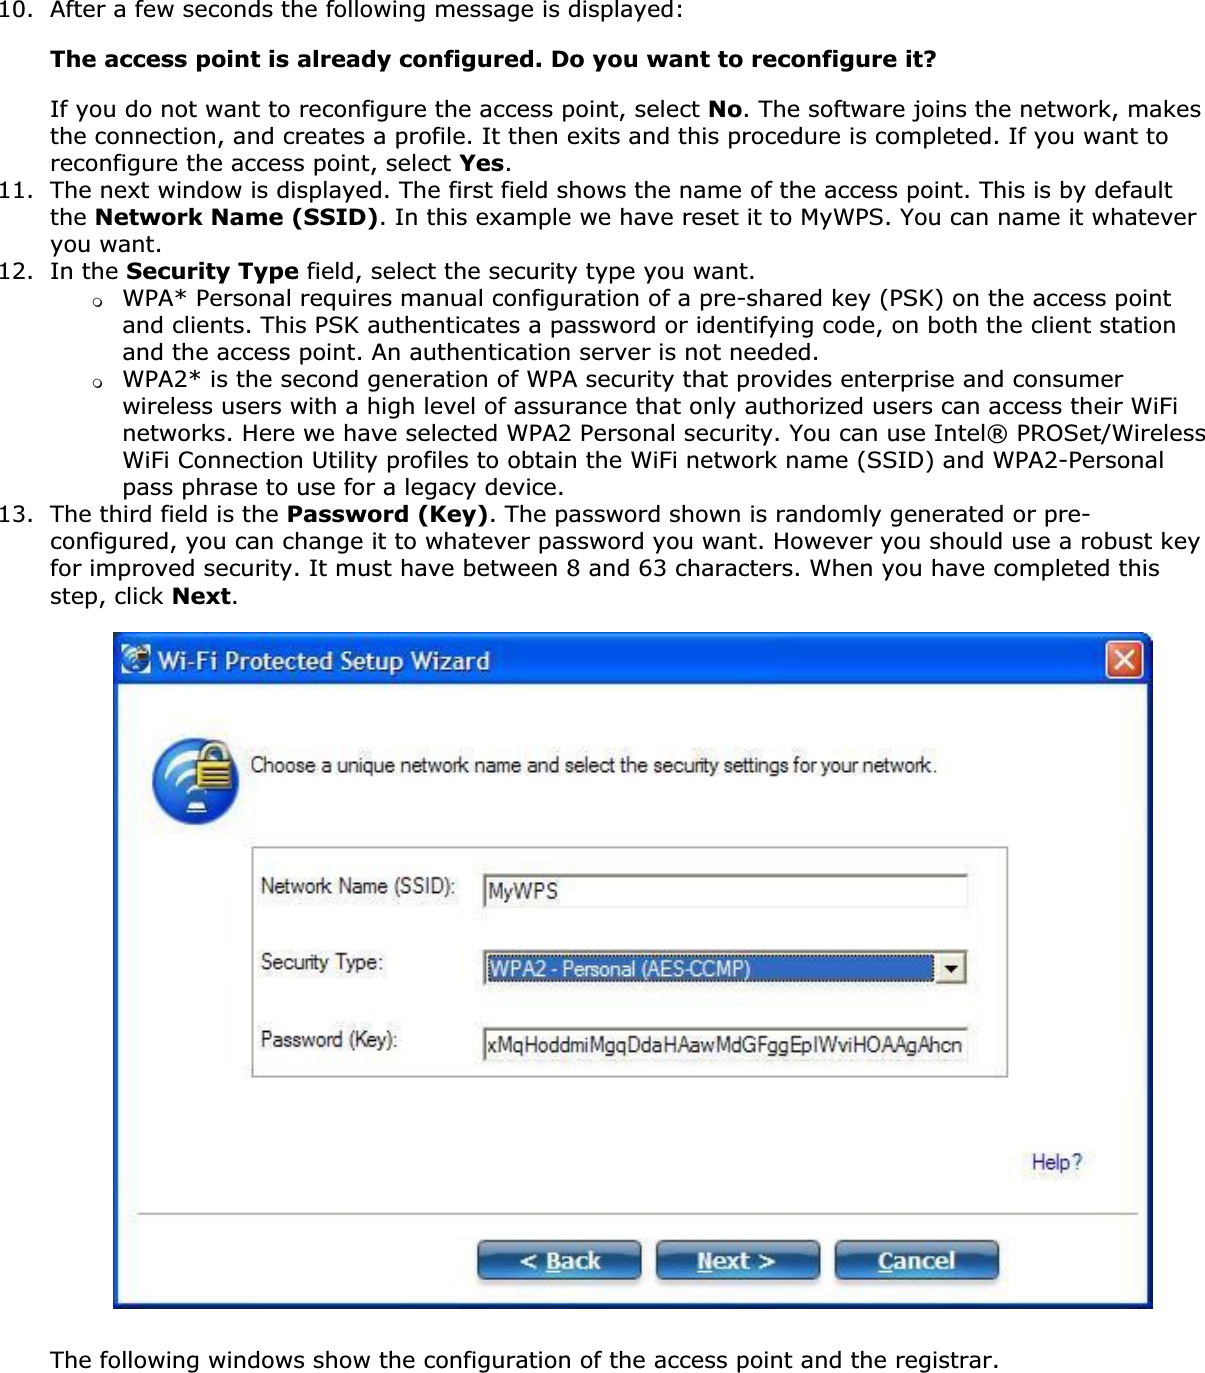 10. After a few seconds the following message is displayed:The access point is already configured. Do you want to reconfigure it?If you do not want to reconfigure the access point, select No. The software joins the network, makes the connection, and creates a profile. It then exits and this procedure is completed. If you want to reconfigure the access point, select Yes.11. The next window is displayed. The first field shows the name of the access point. This is by default the Network Name (SSID). In this example we have reset it to MyWPS. You can name it whatever you want.12. In the Security Type field, select the security type you want.❍WPA* Personal requires manual configuration of a pre-shared key (PSK) on the access point and clients. This PSK authenticates a password or identifying code, on both the client station and the access point. An authentication server is not needed.❍WPA2* is the second generation of WPA security that provides enterprise and consumer wireless users with a high level of assurance that only authorized users can access their WiFi networks. Here we have selected WPA2 Personal security. You can use Intel® PROSet/Wireless WiFi Connection Utility profiles to obtain the WiFi network name (SSID) and WPA2-Personal pass phrase to use for a legacy device.13. The third field is the Password (Key). The password shown is randomly generated or pre-configured, you can change it to whatever password you want. However you should use a robust key for improved security. It must have between 8 and 63 characters. When you have completed this step, click Next.The following windows show the configuration of the access point and the registrar.